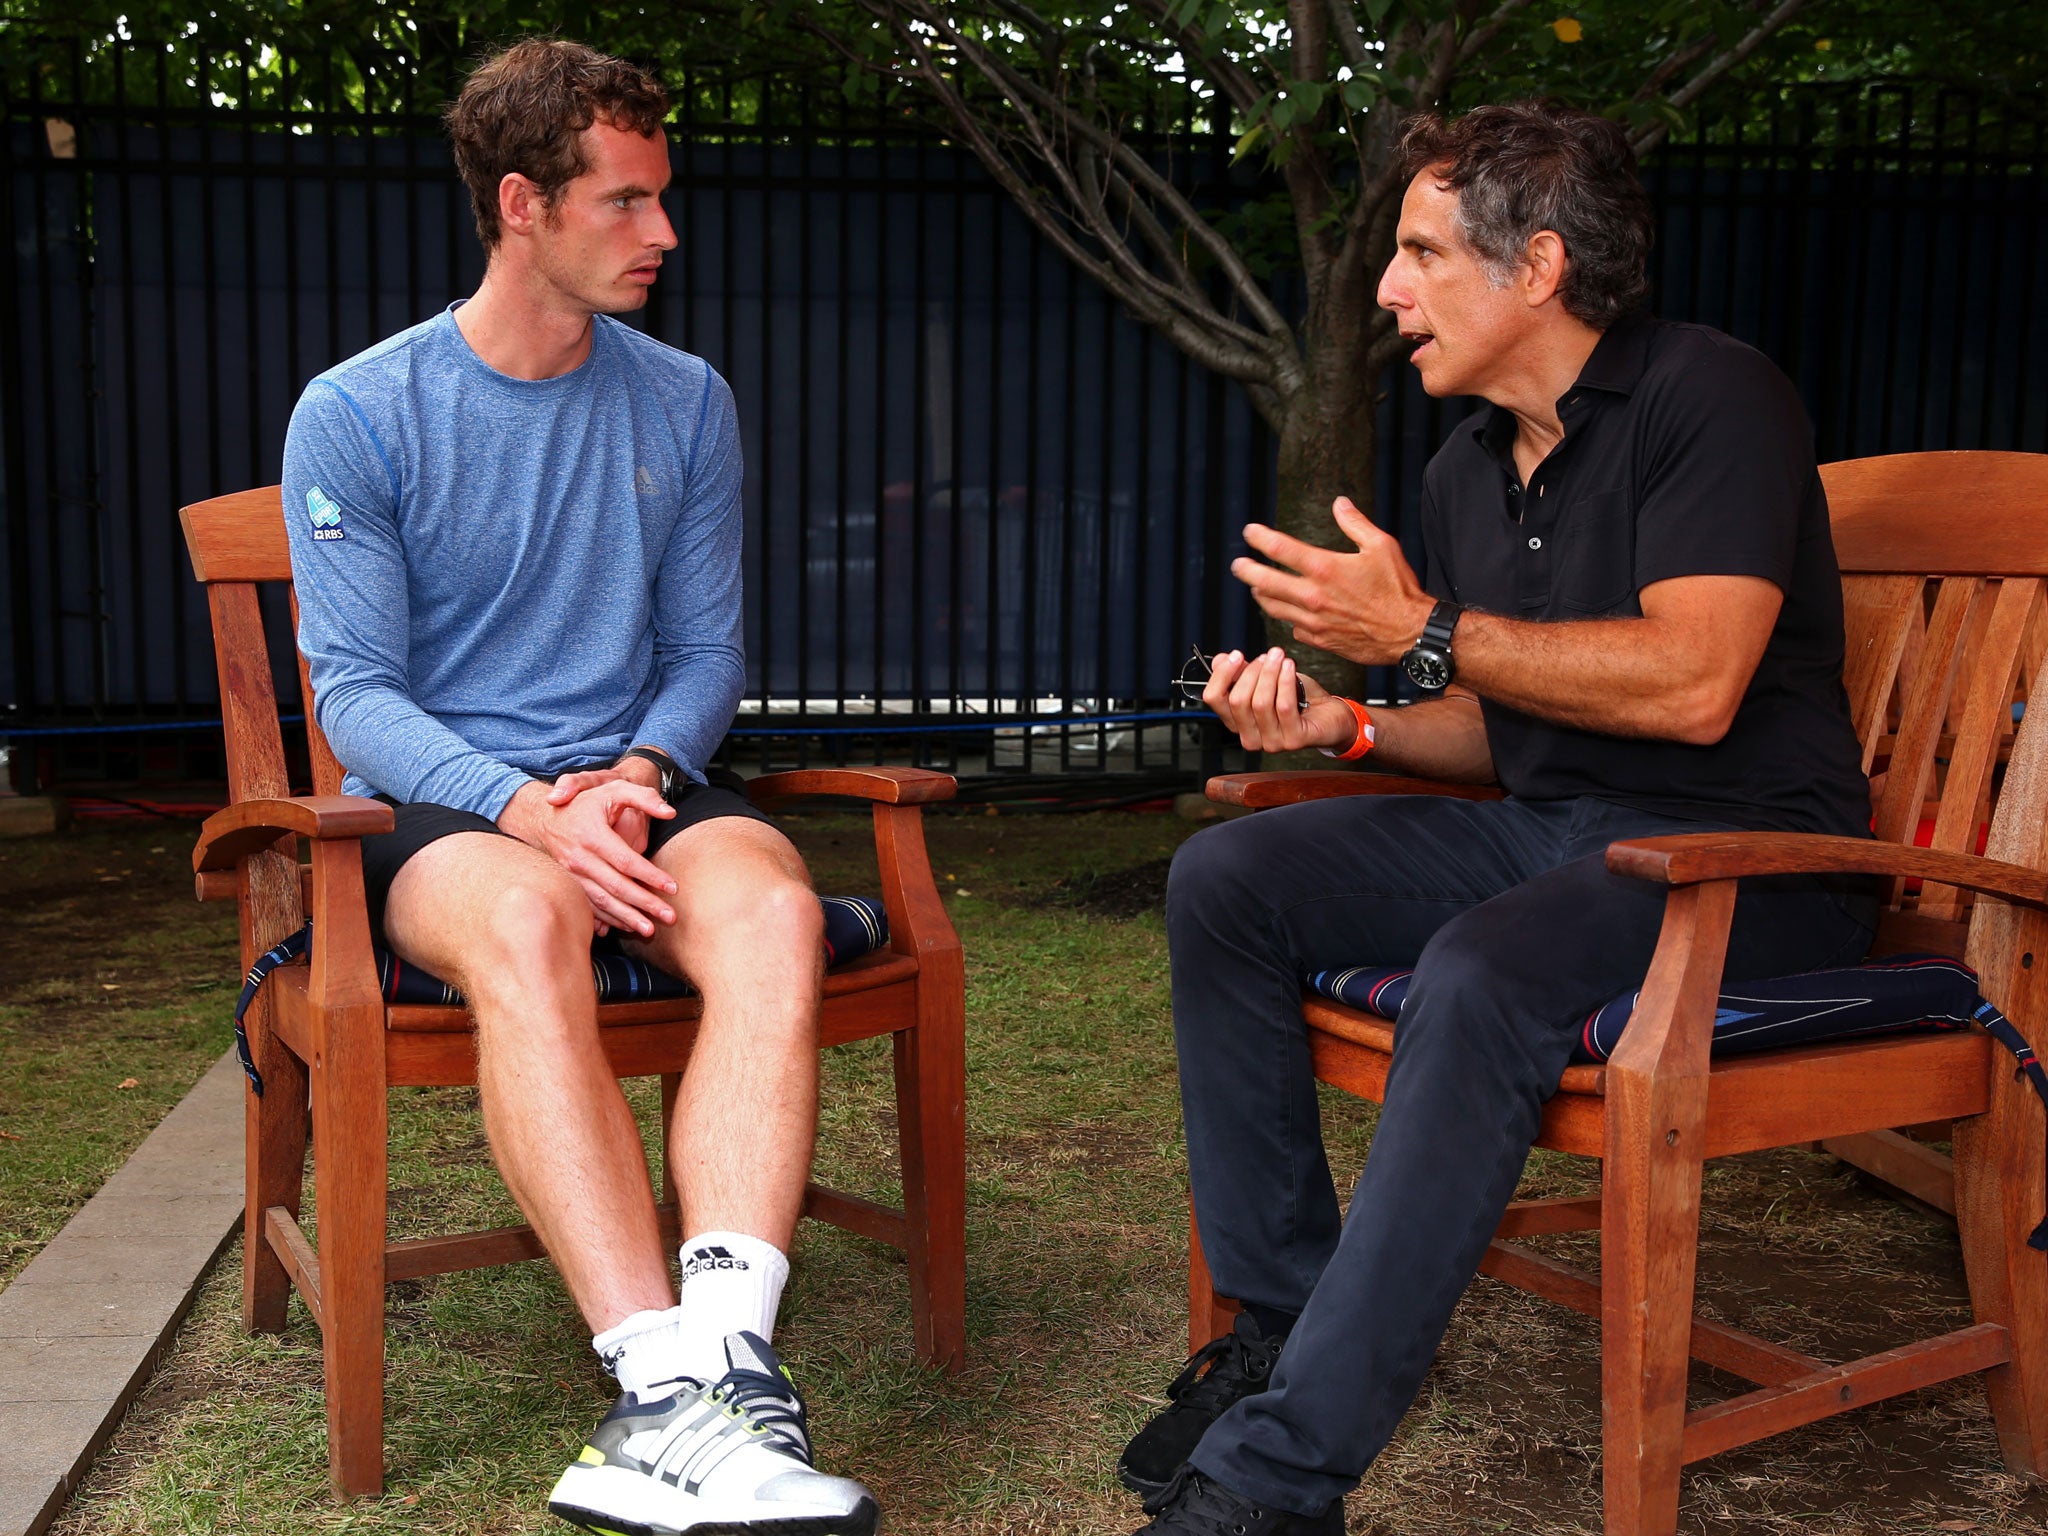 The actor Ben Stiller guest-stars on Andy Murray's coaching team